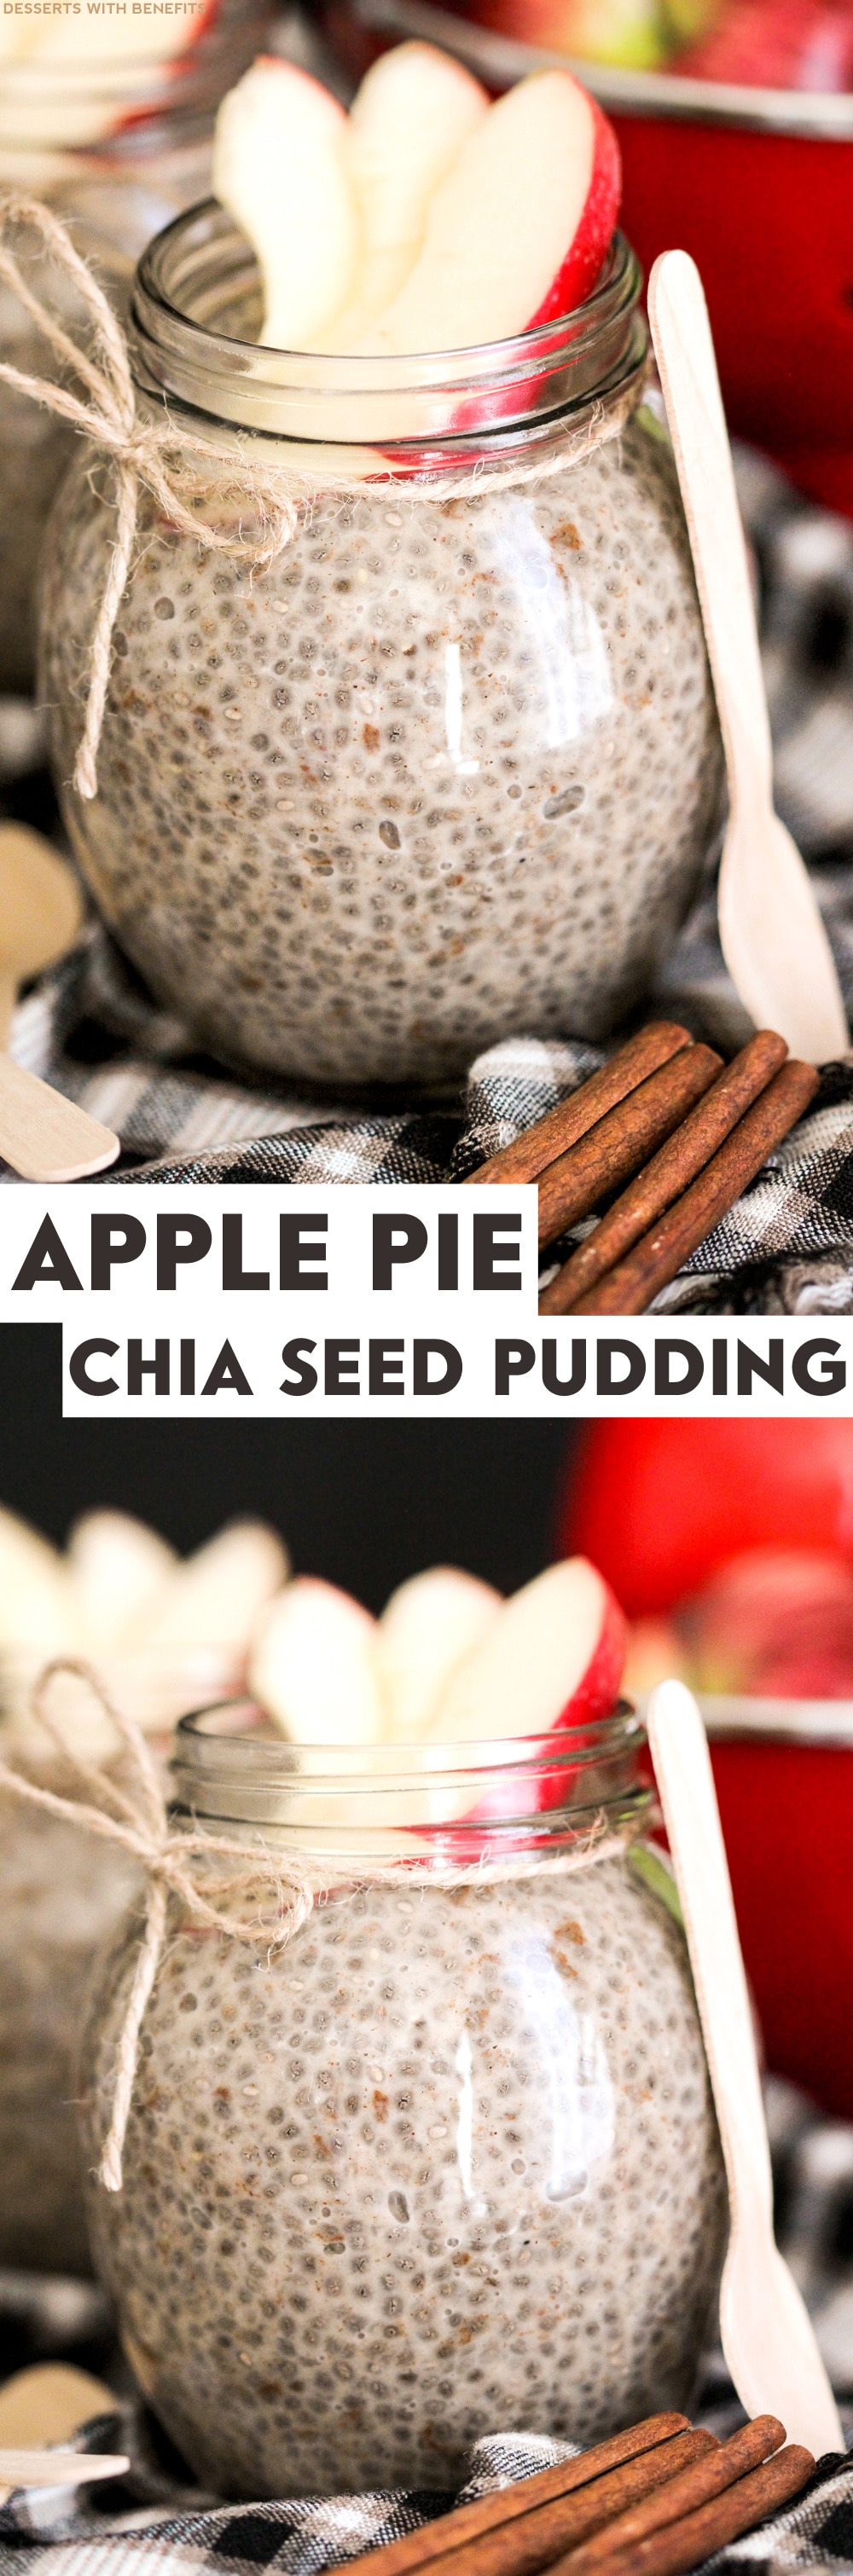 Healthy Apple Pie Chia Seed Pudding (refined sugar free, low fat, low calorie, high fiber, gluten free, dairy free, vegan) - Healthy Dessert Recipes at Desserts with Benefits